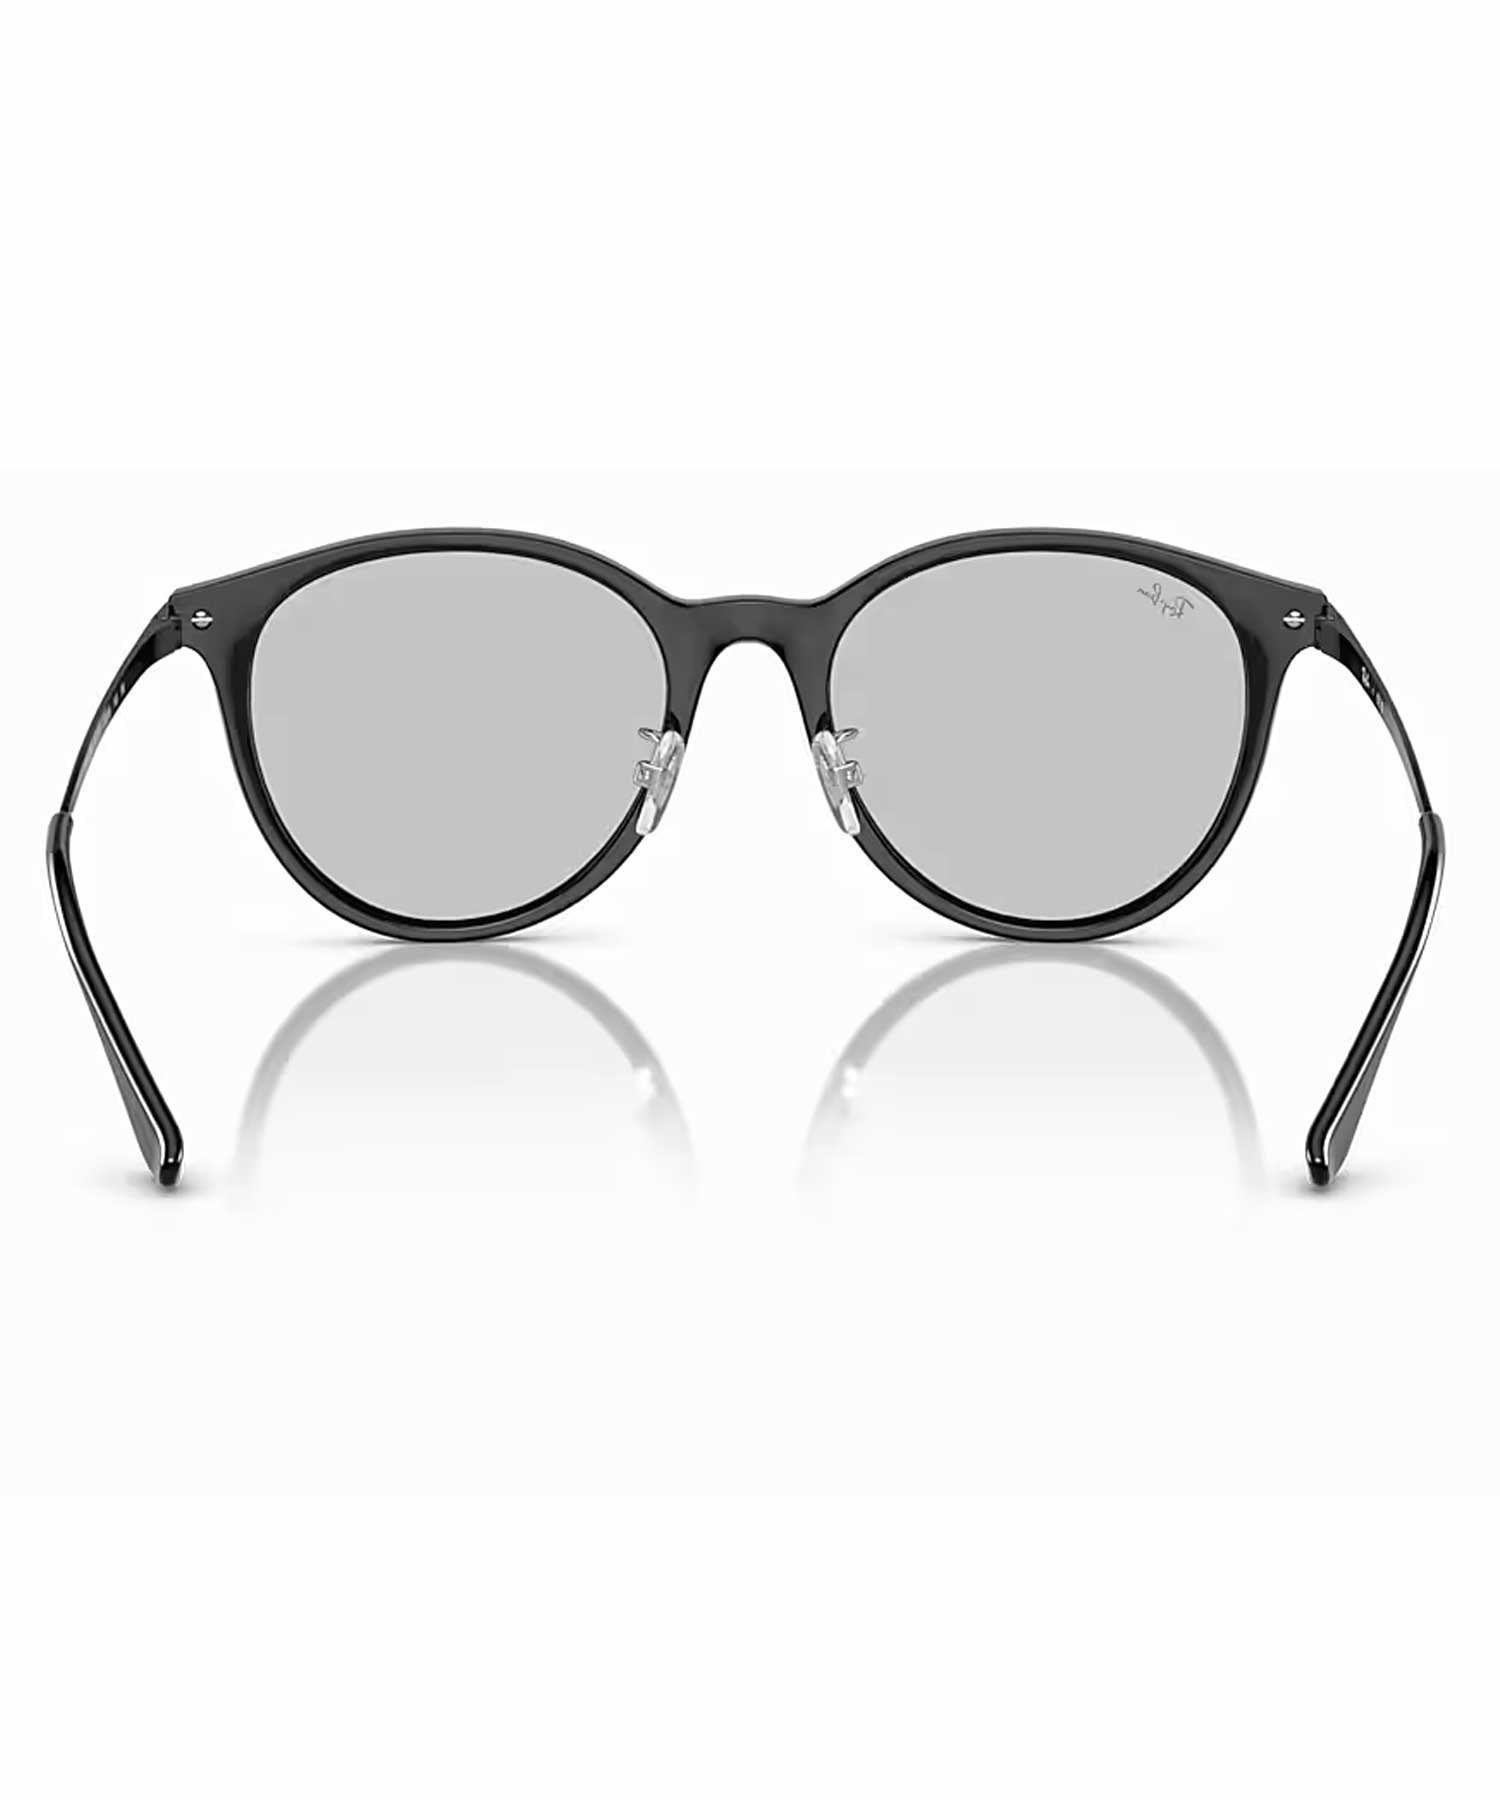 Ray-Ban/レイバン サングラス YOUNGSTER WASHED LENSES 0RB4334D(60187-55cm)